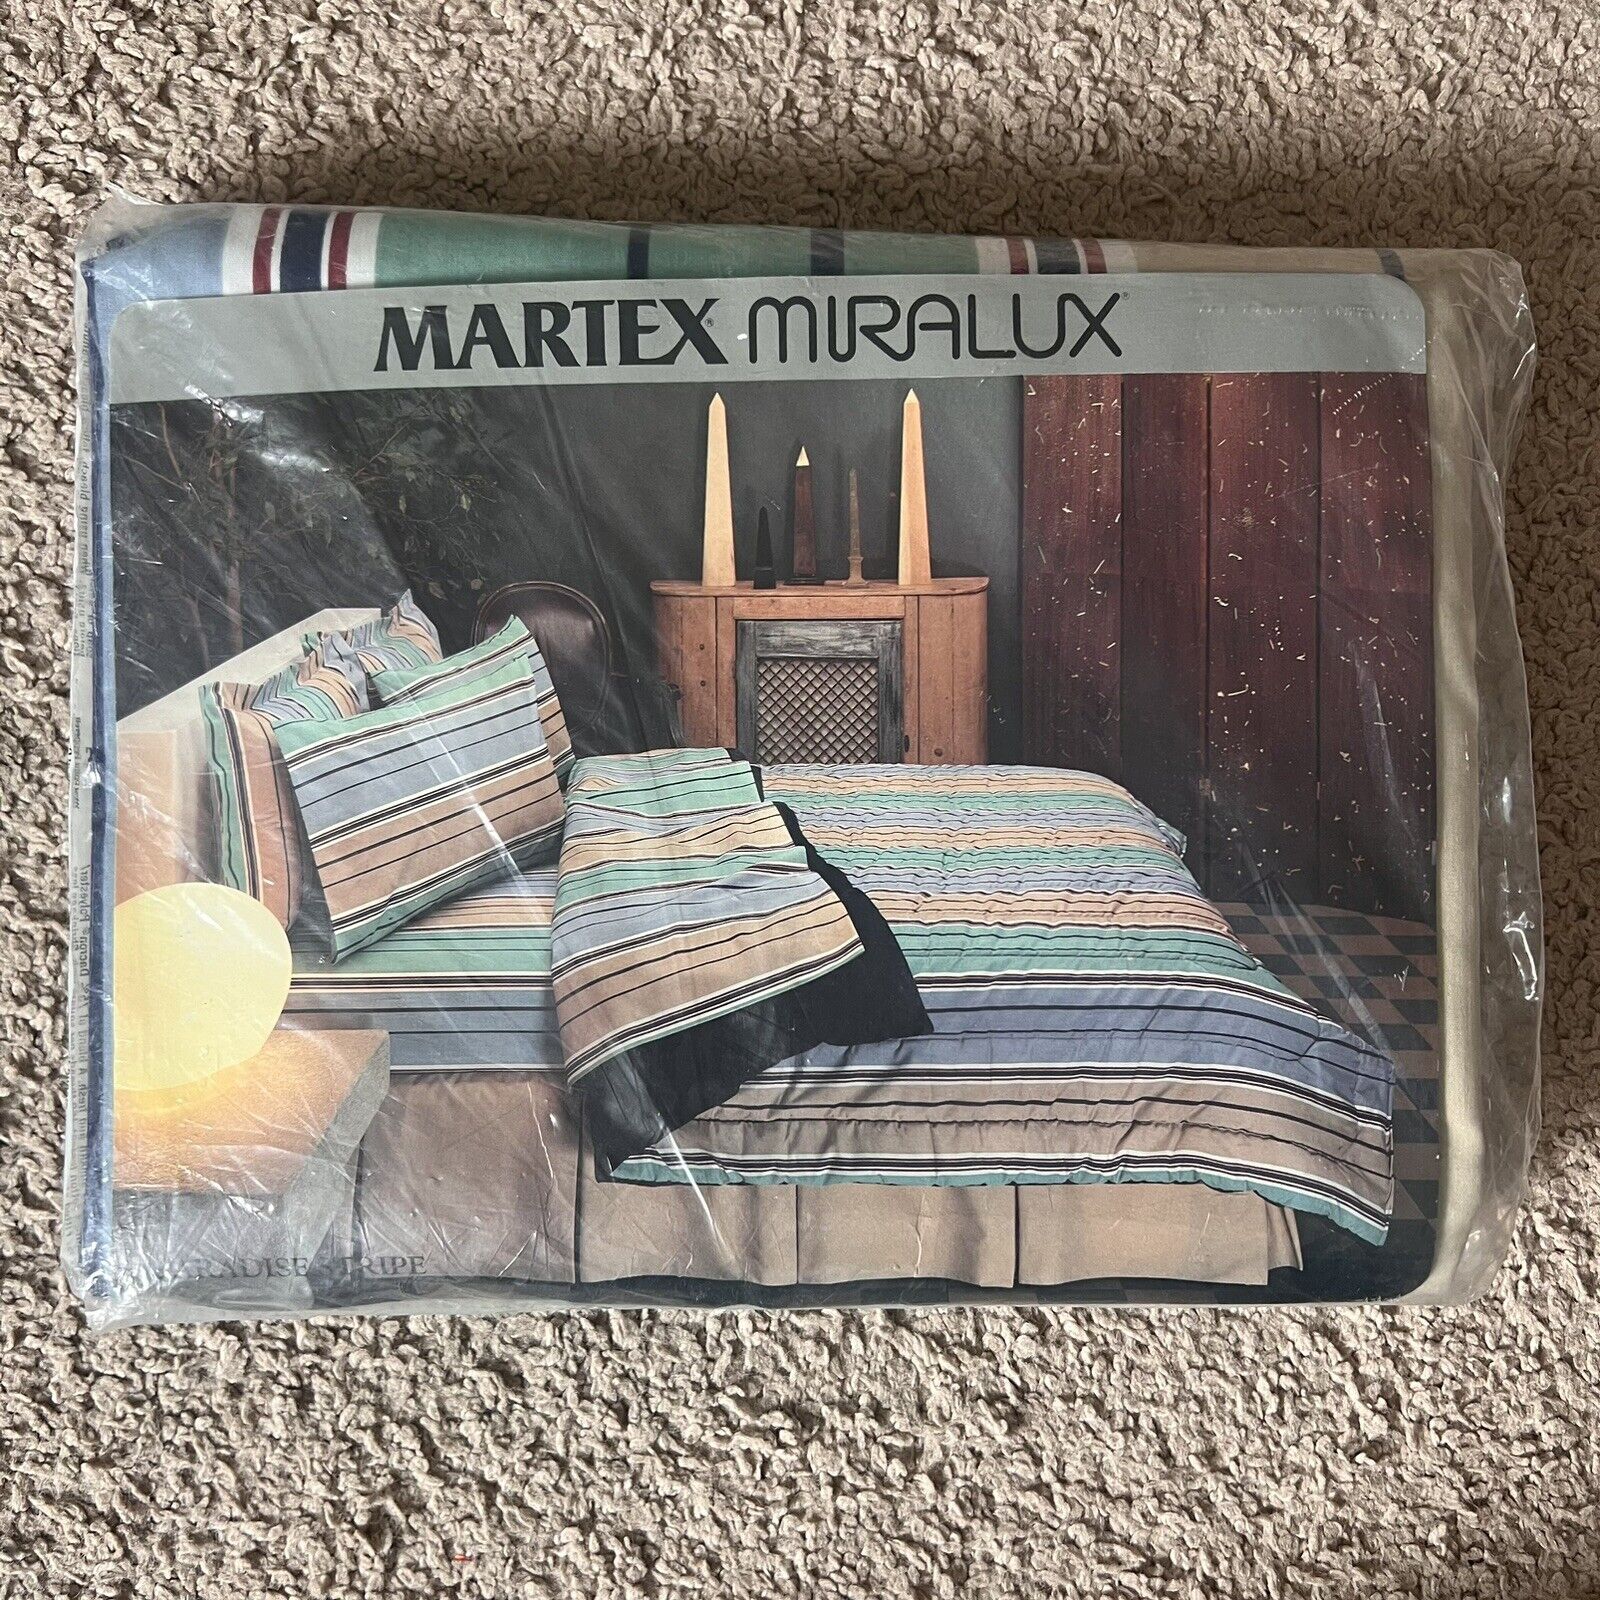 Vintage Full Fitted Sheet No-Iron Martex Miralux Paradise Stripe SEALED